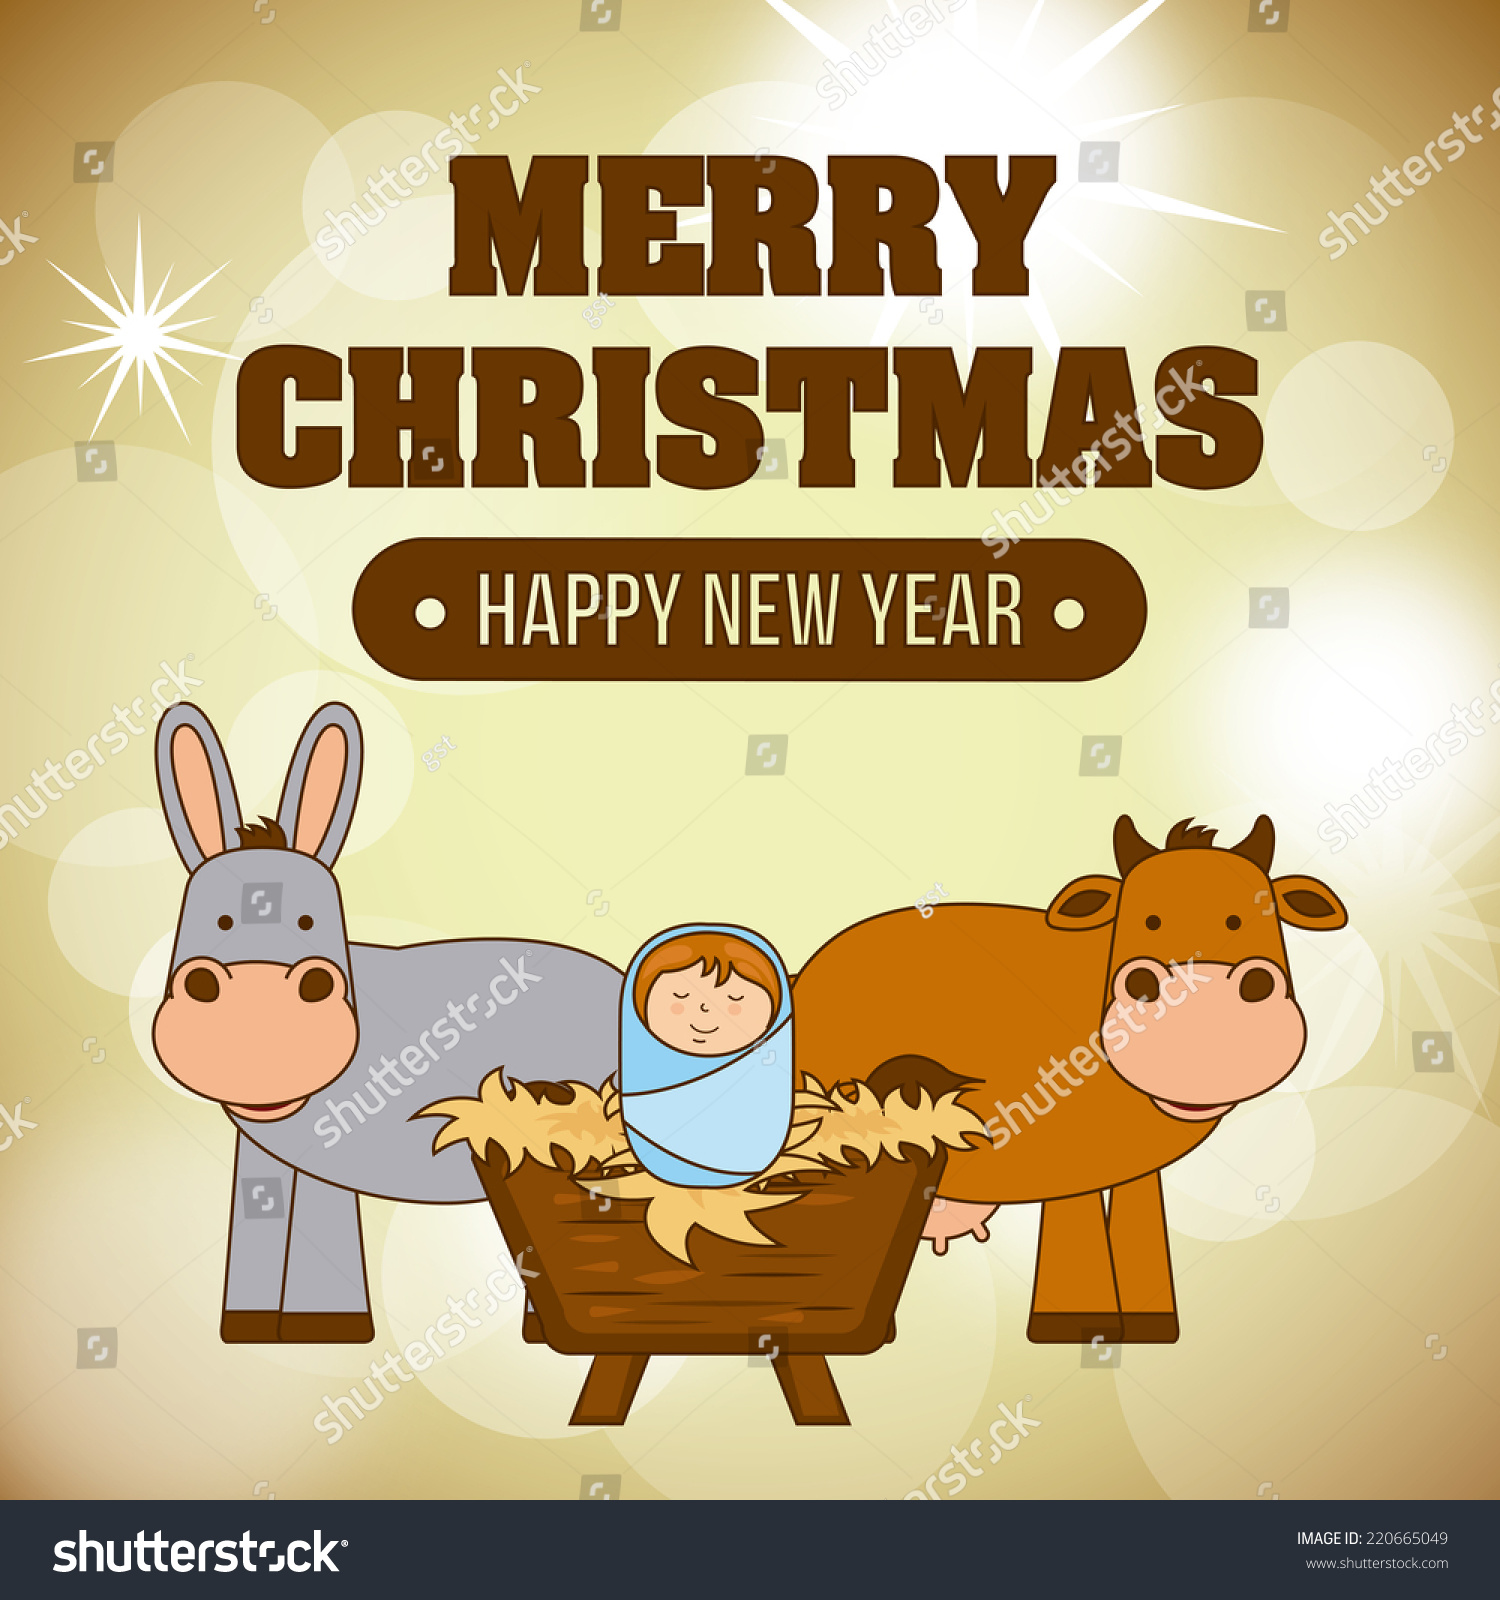 Christmas Graphic Design Vector Illustration Stock Vector (Royalty Free